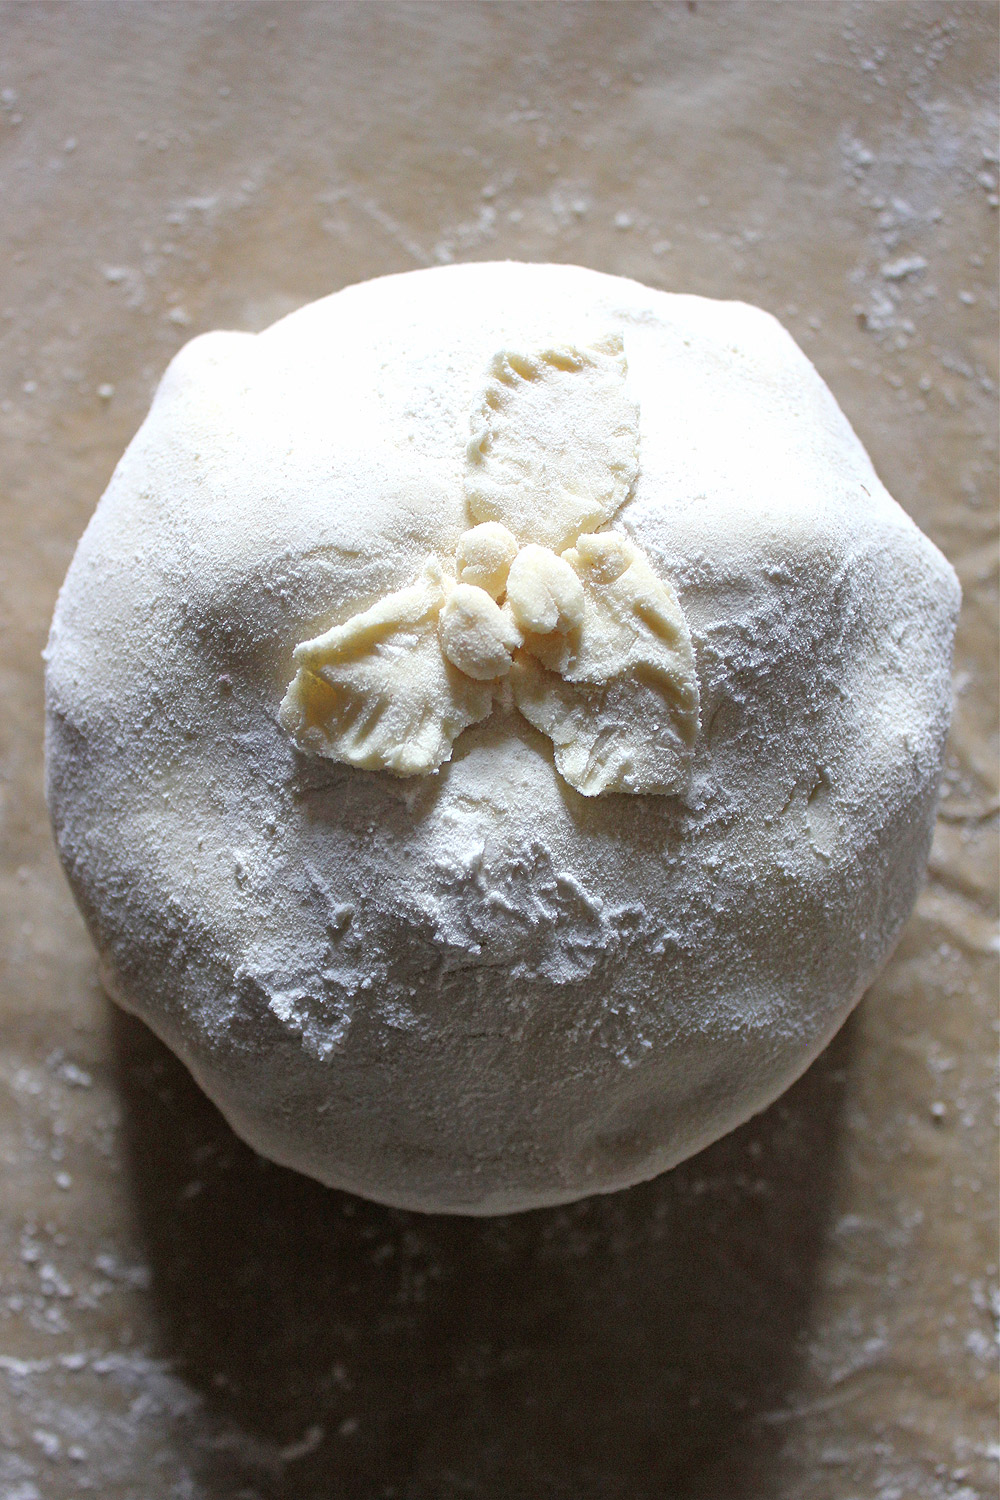 Brie wrapped in uncooked puff pastry with a pastry decoration applied before baking brie.